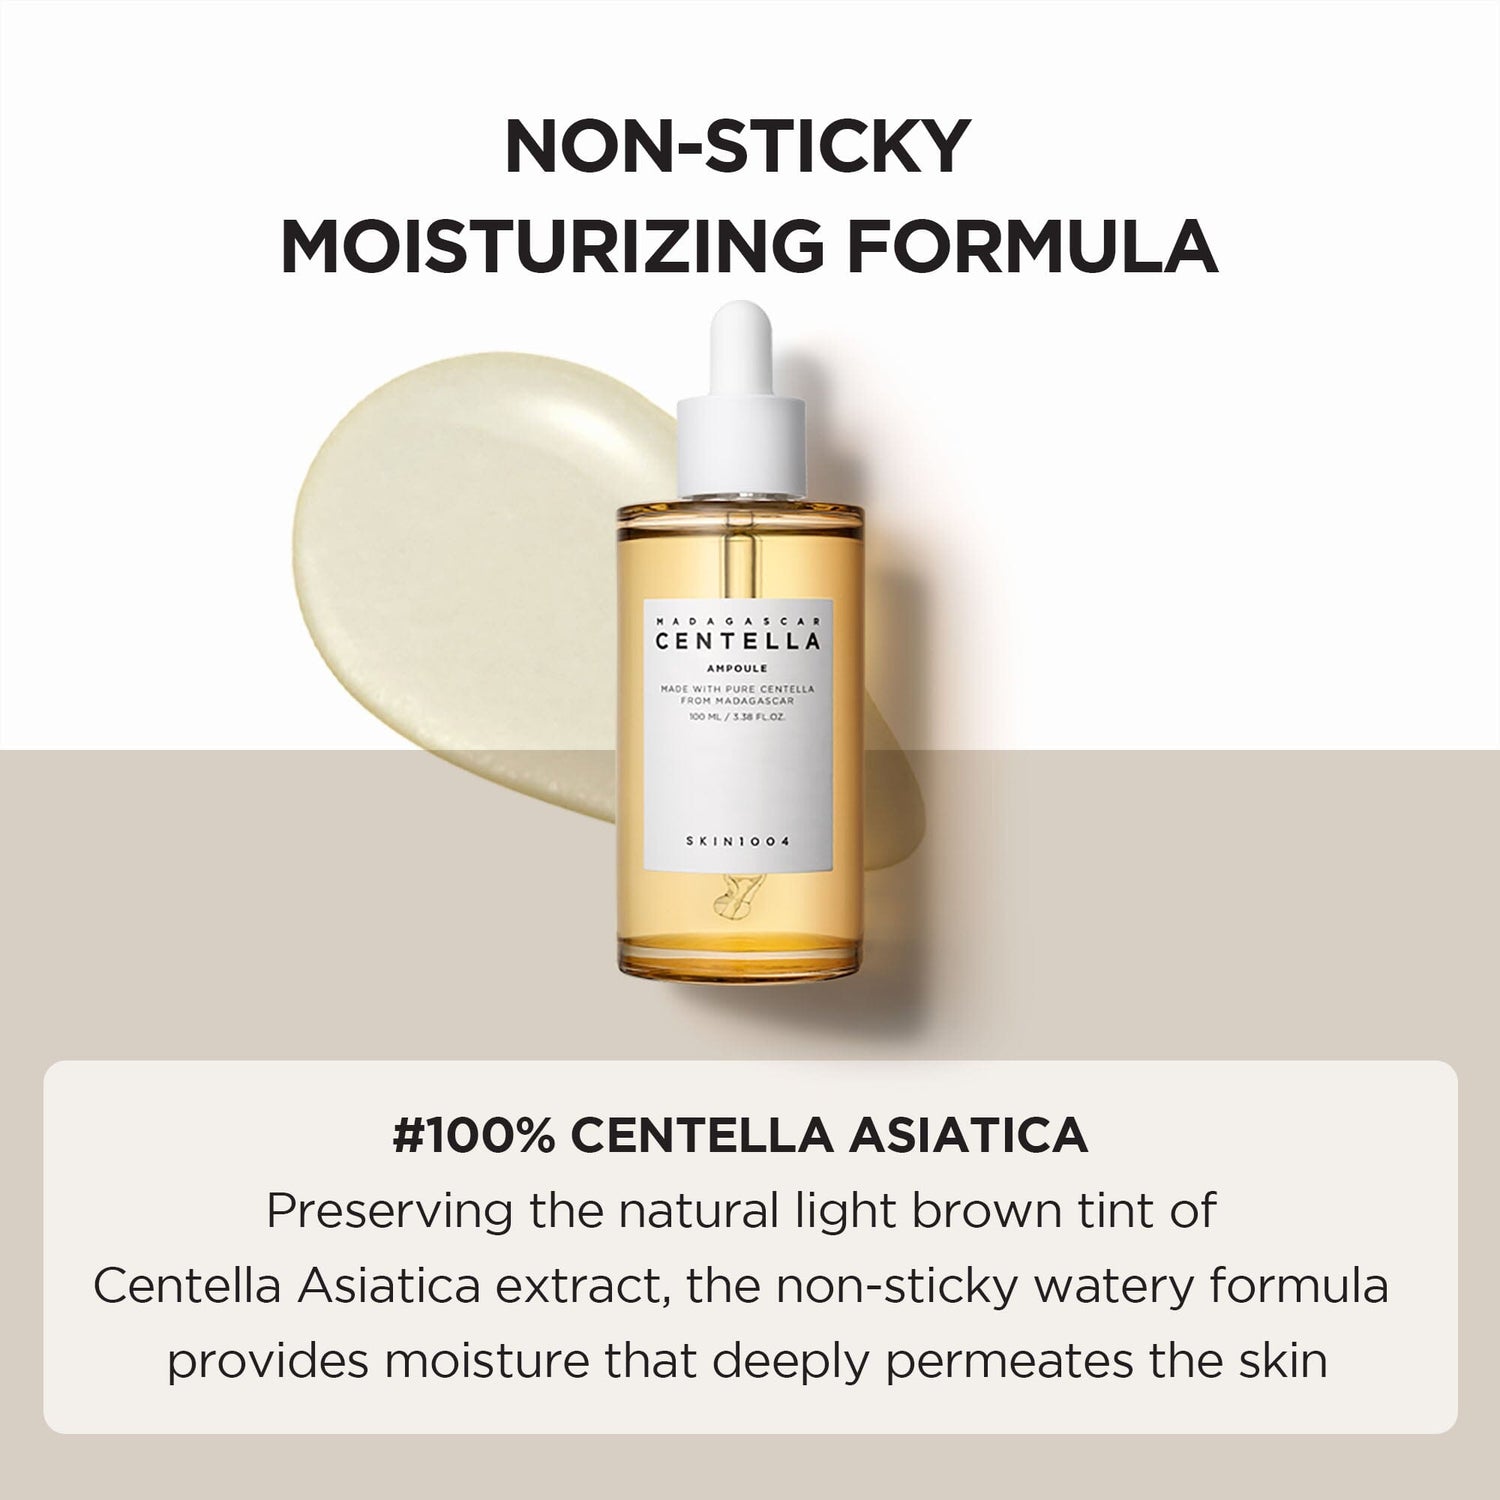 SKIN1004 Madagascar Centella Ampoule 55ml, at Orion Beauty. SKIN1004 Official Sole Authorized Retailer in Sri Lanka!